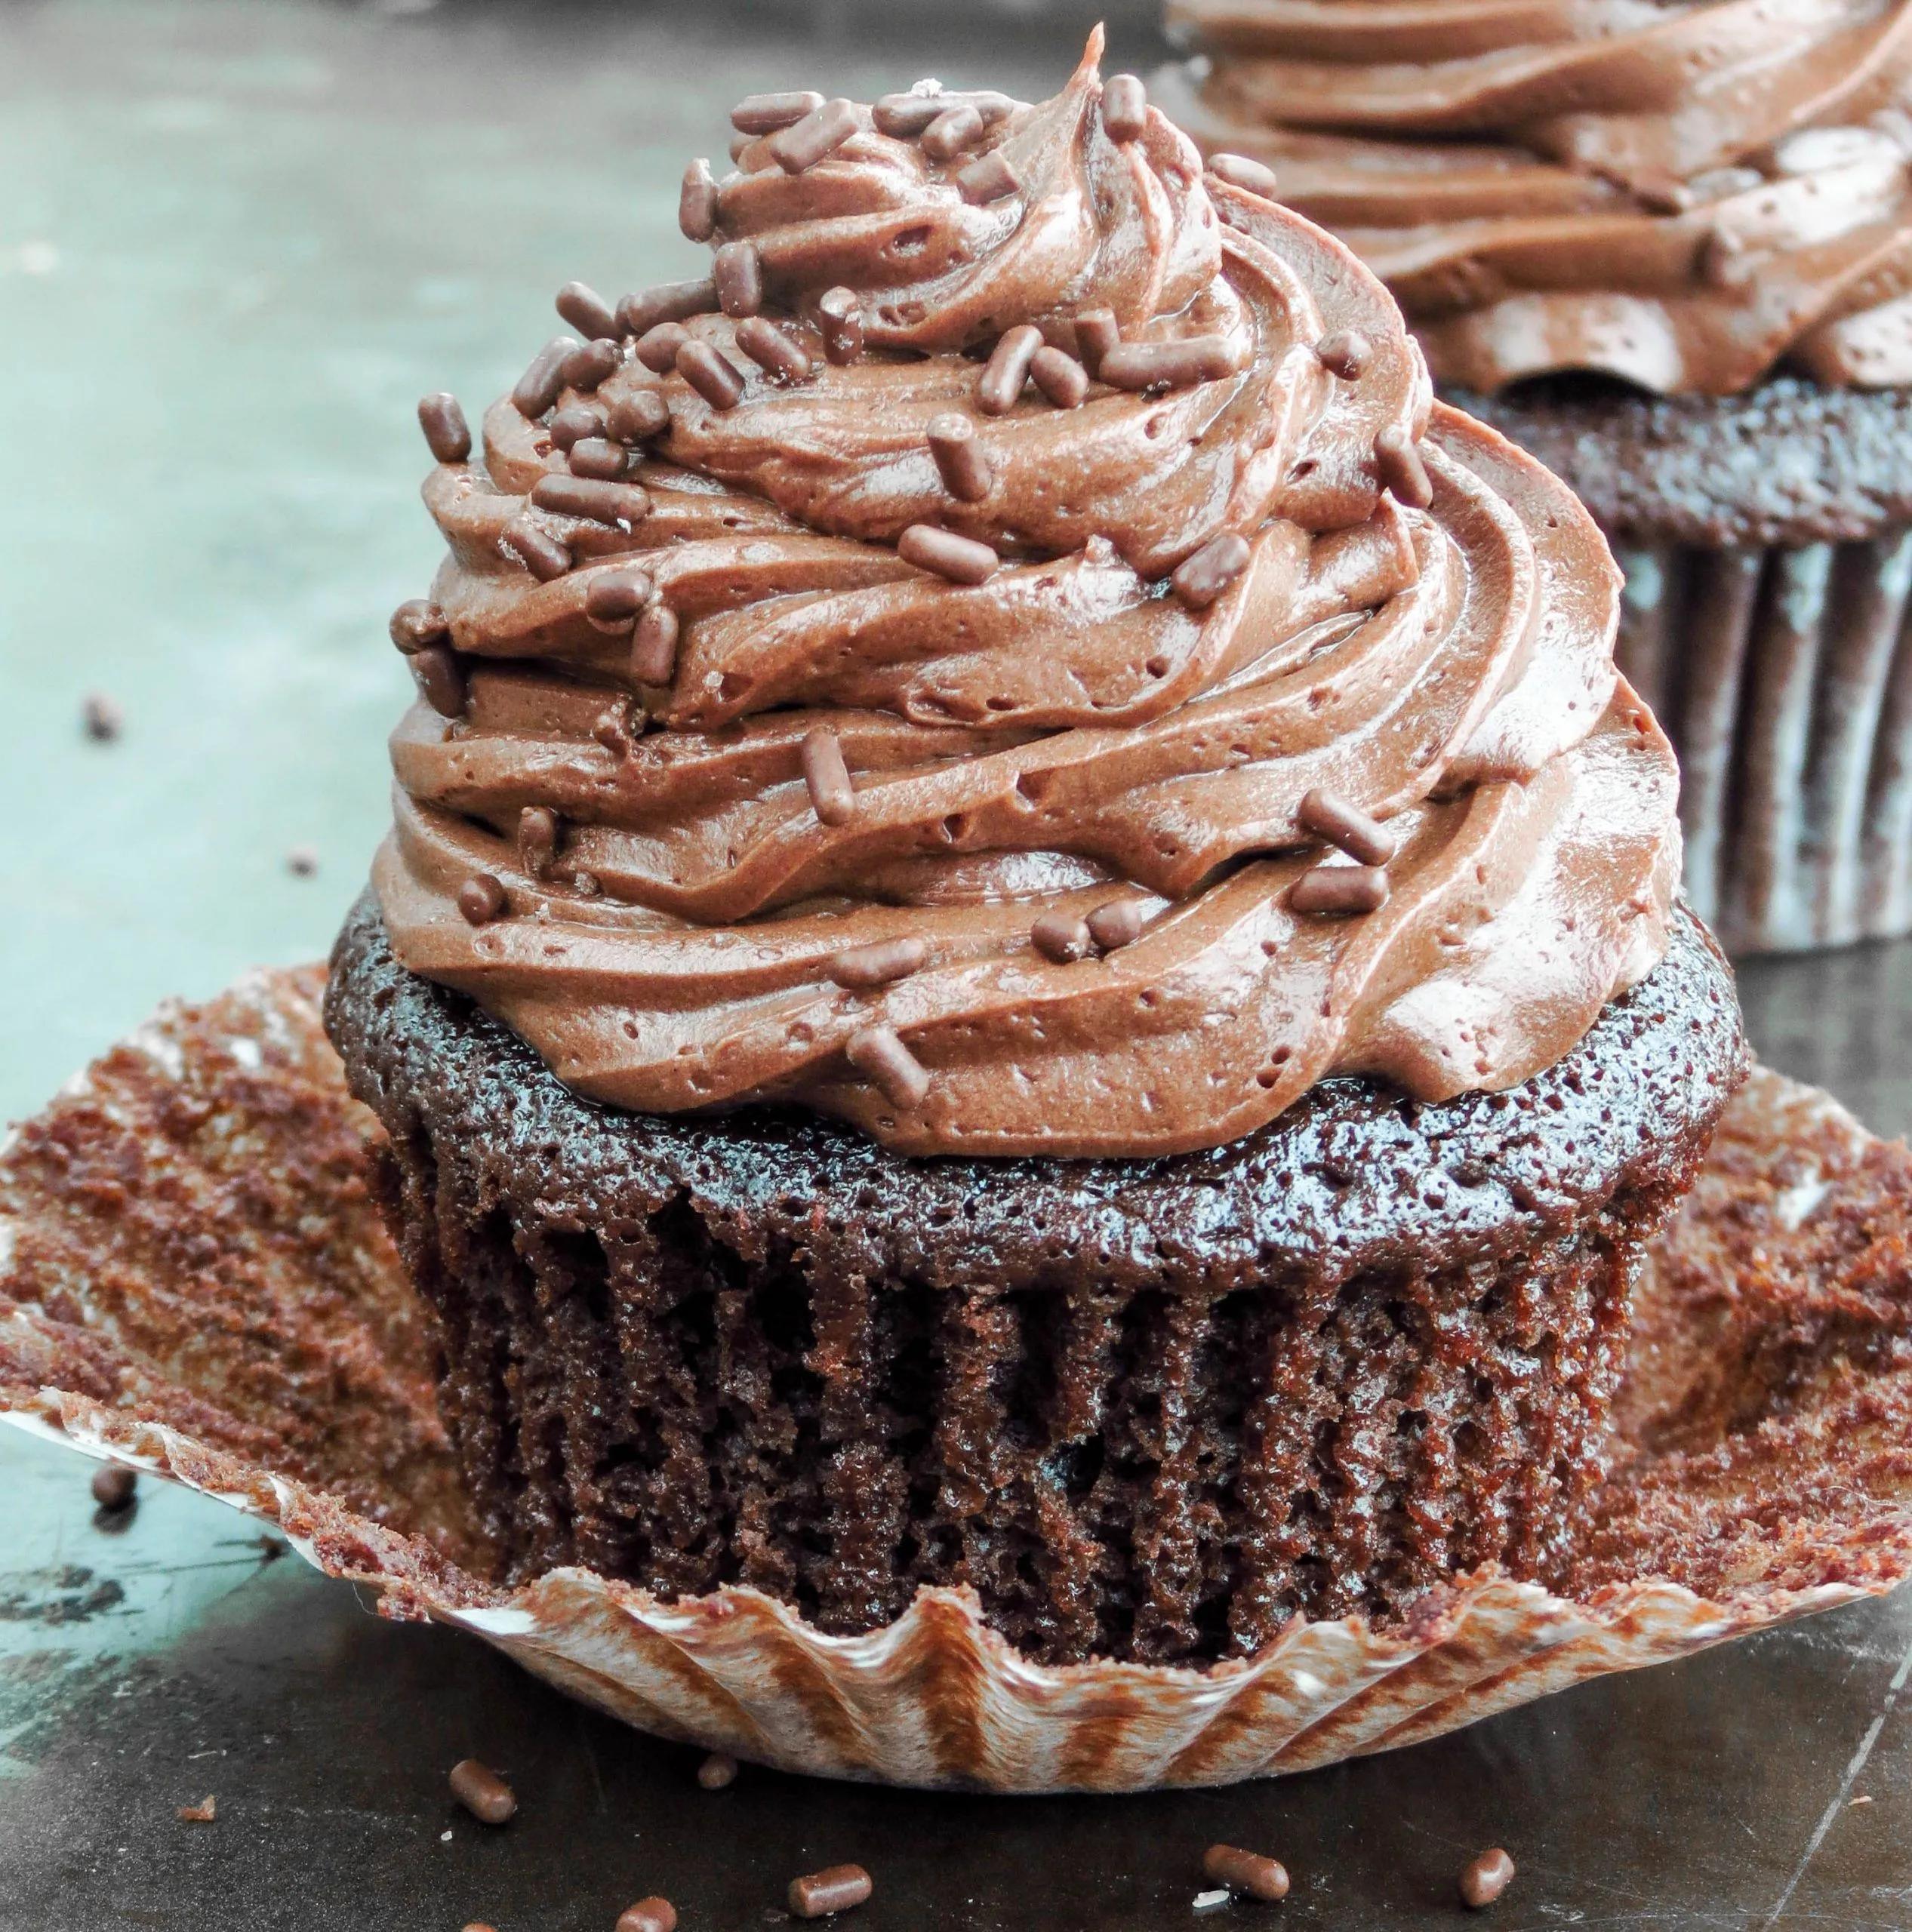 The Ultimate Chocolate Cupcakes - Sprinkle Some Sugar in 2020 | Dessert ...